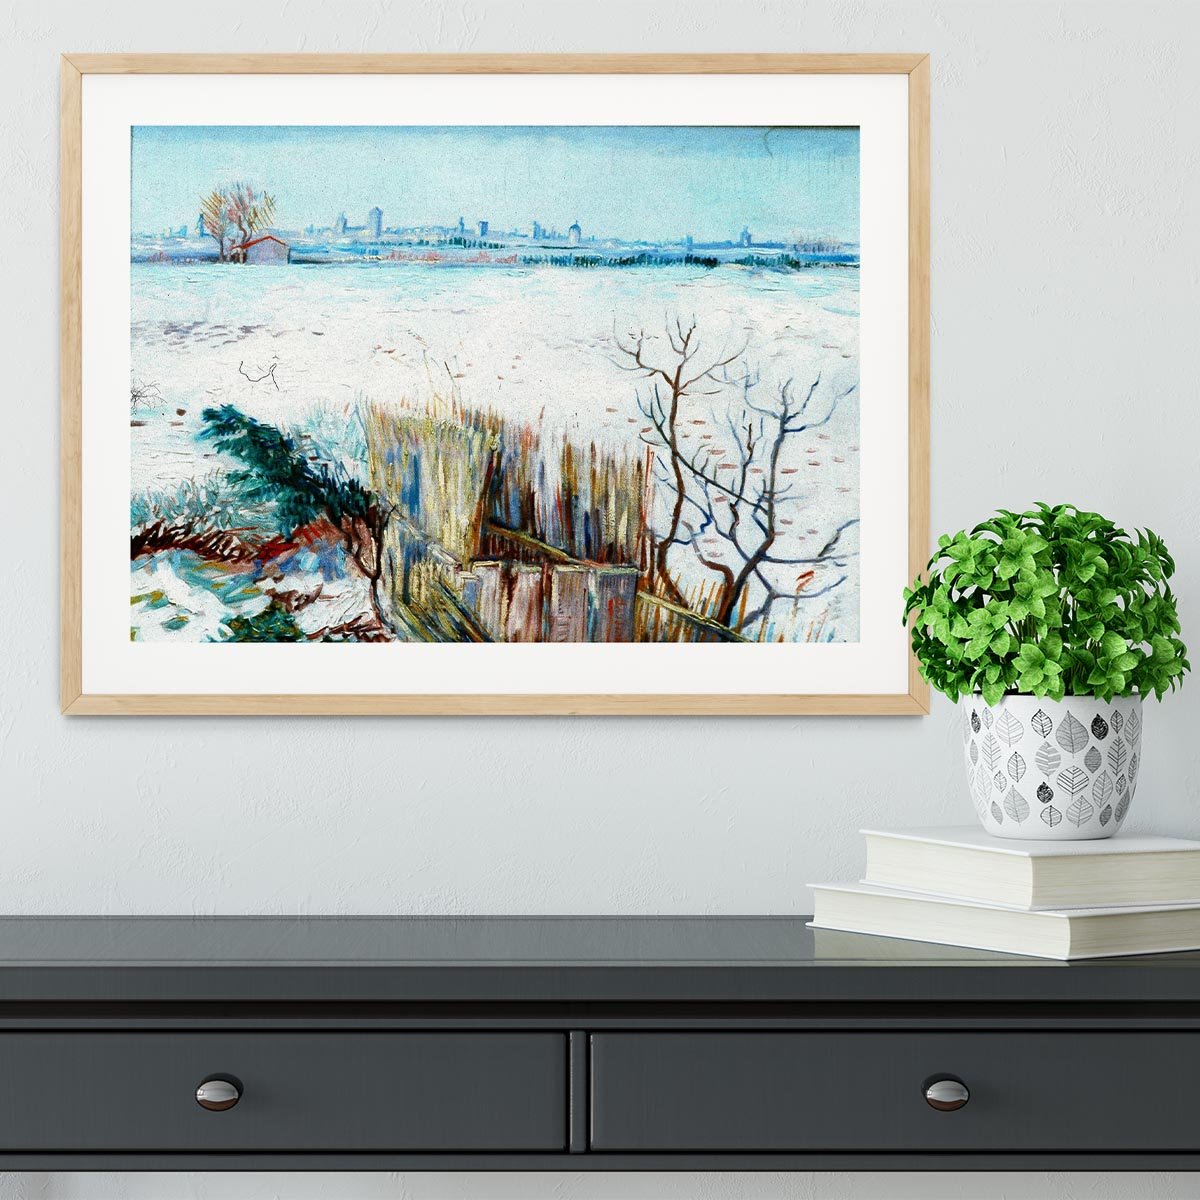 Snowy Landscape with Arles in the Background by Van Gogh Framed Print - Canvas Art Rocks - 3